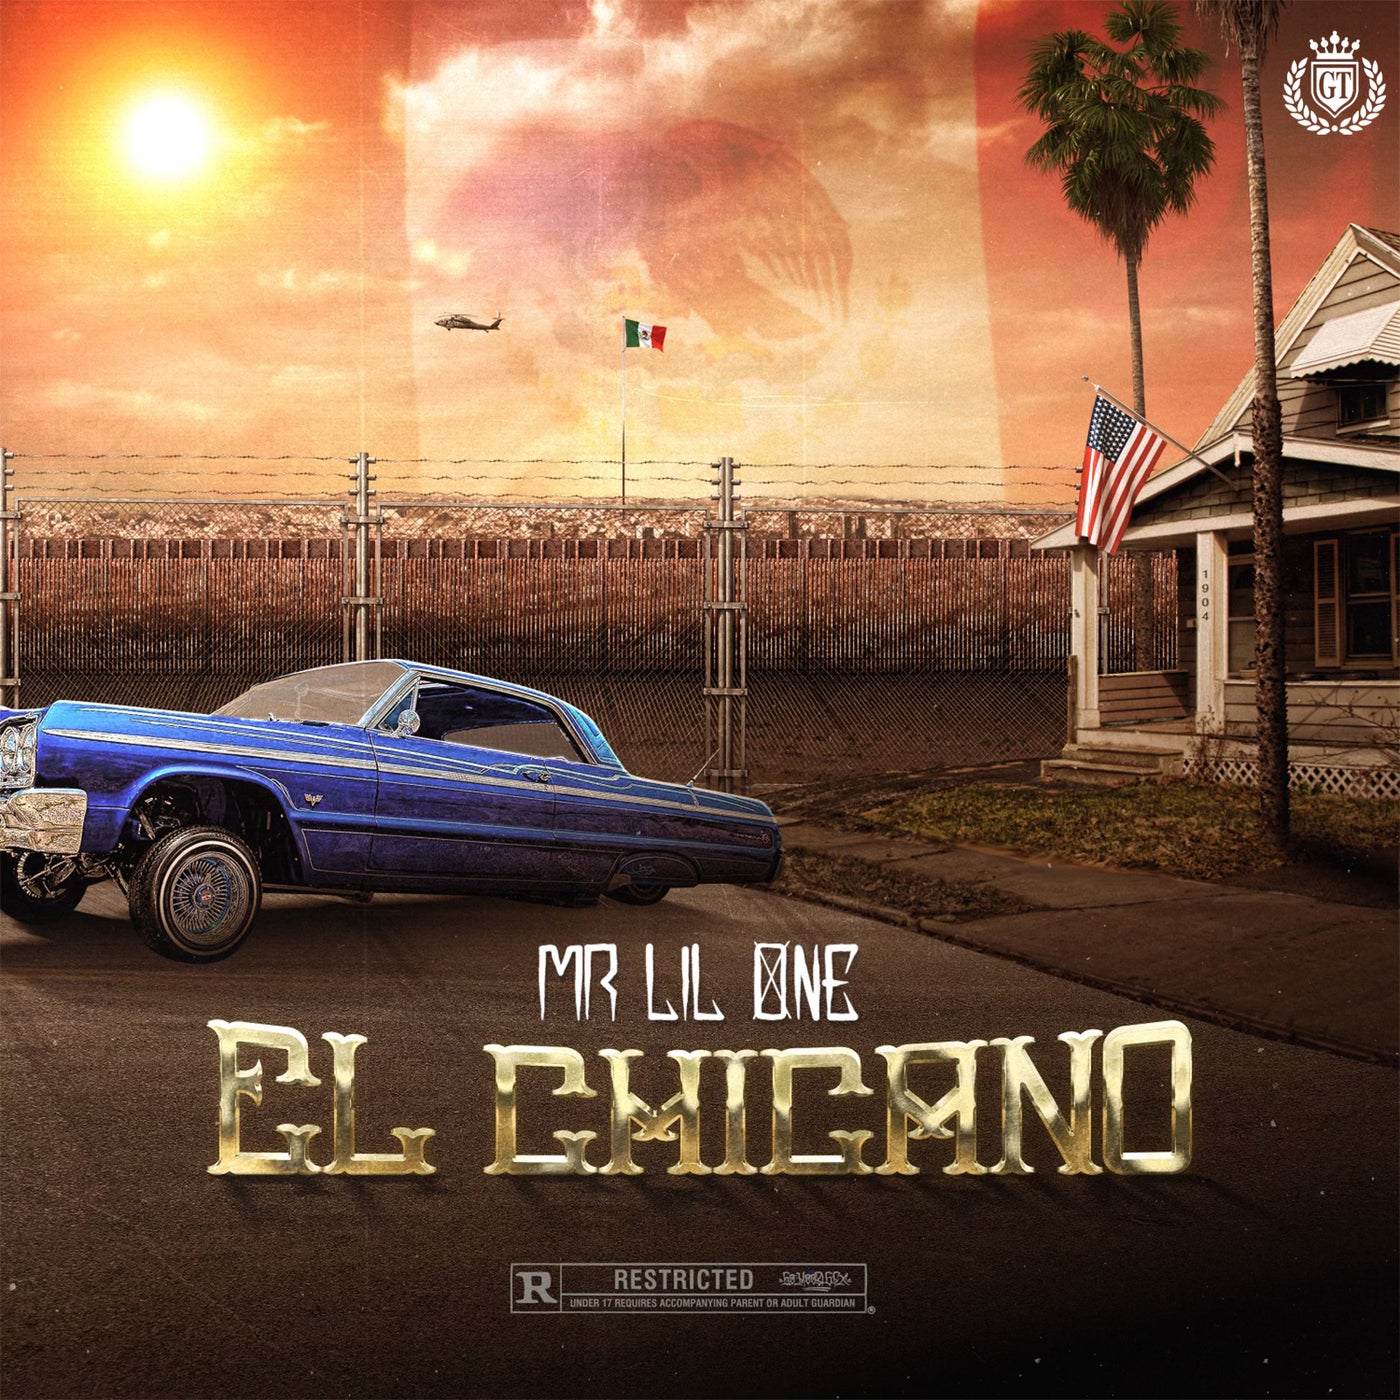 El Chicano by Mr. Lil One, Norman Carter, Finis, Mr. Shadow and Ari 